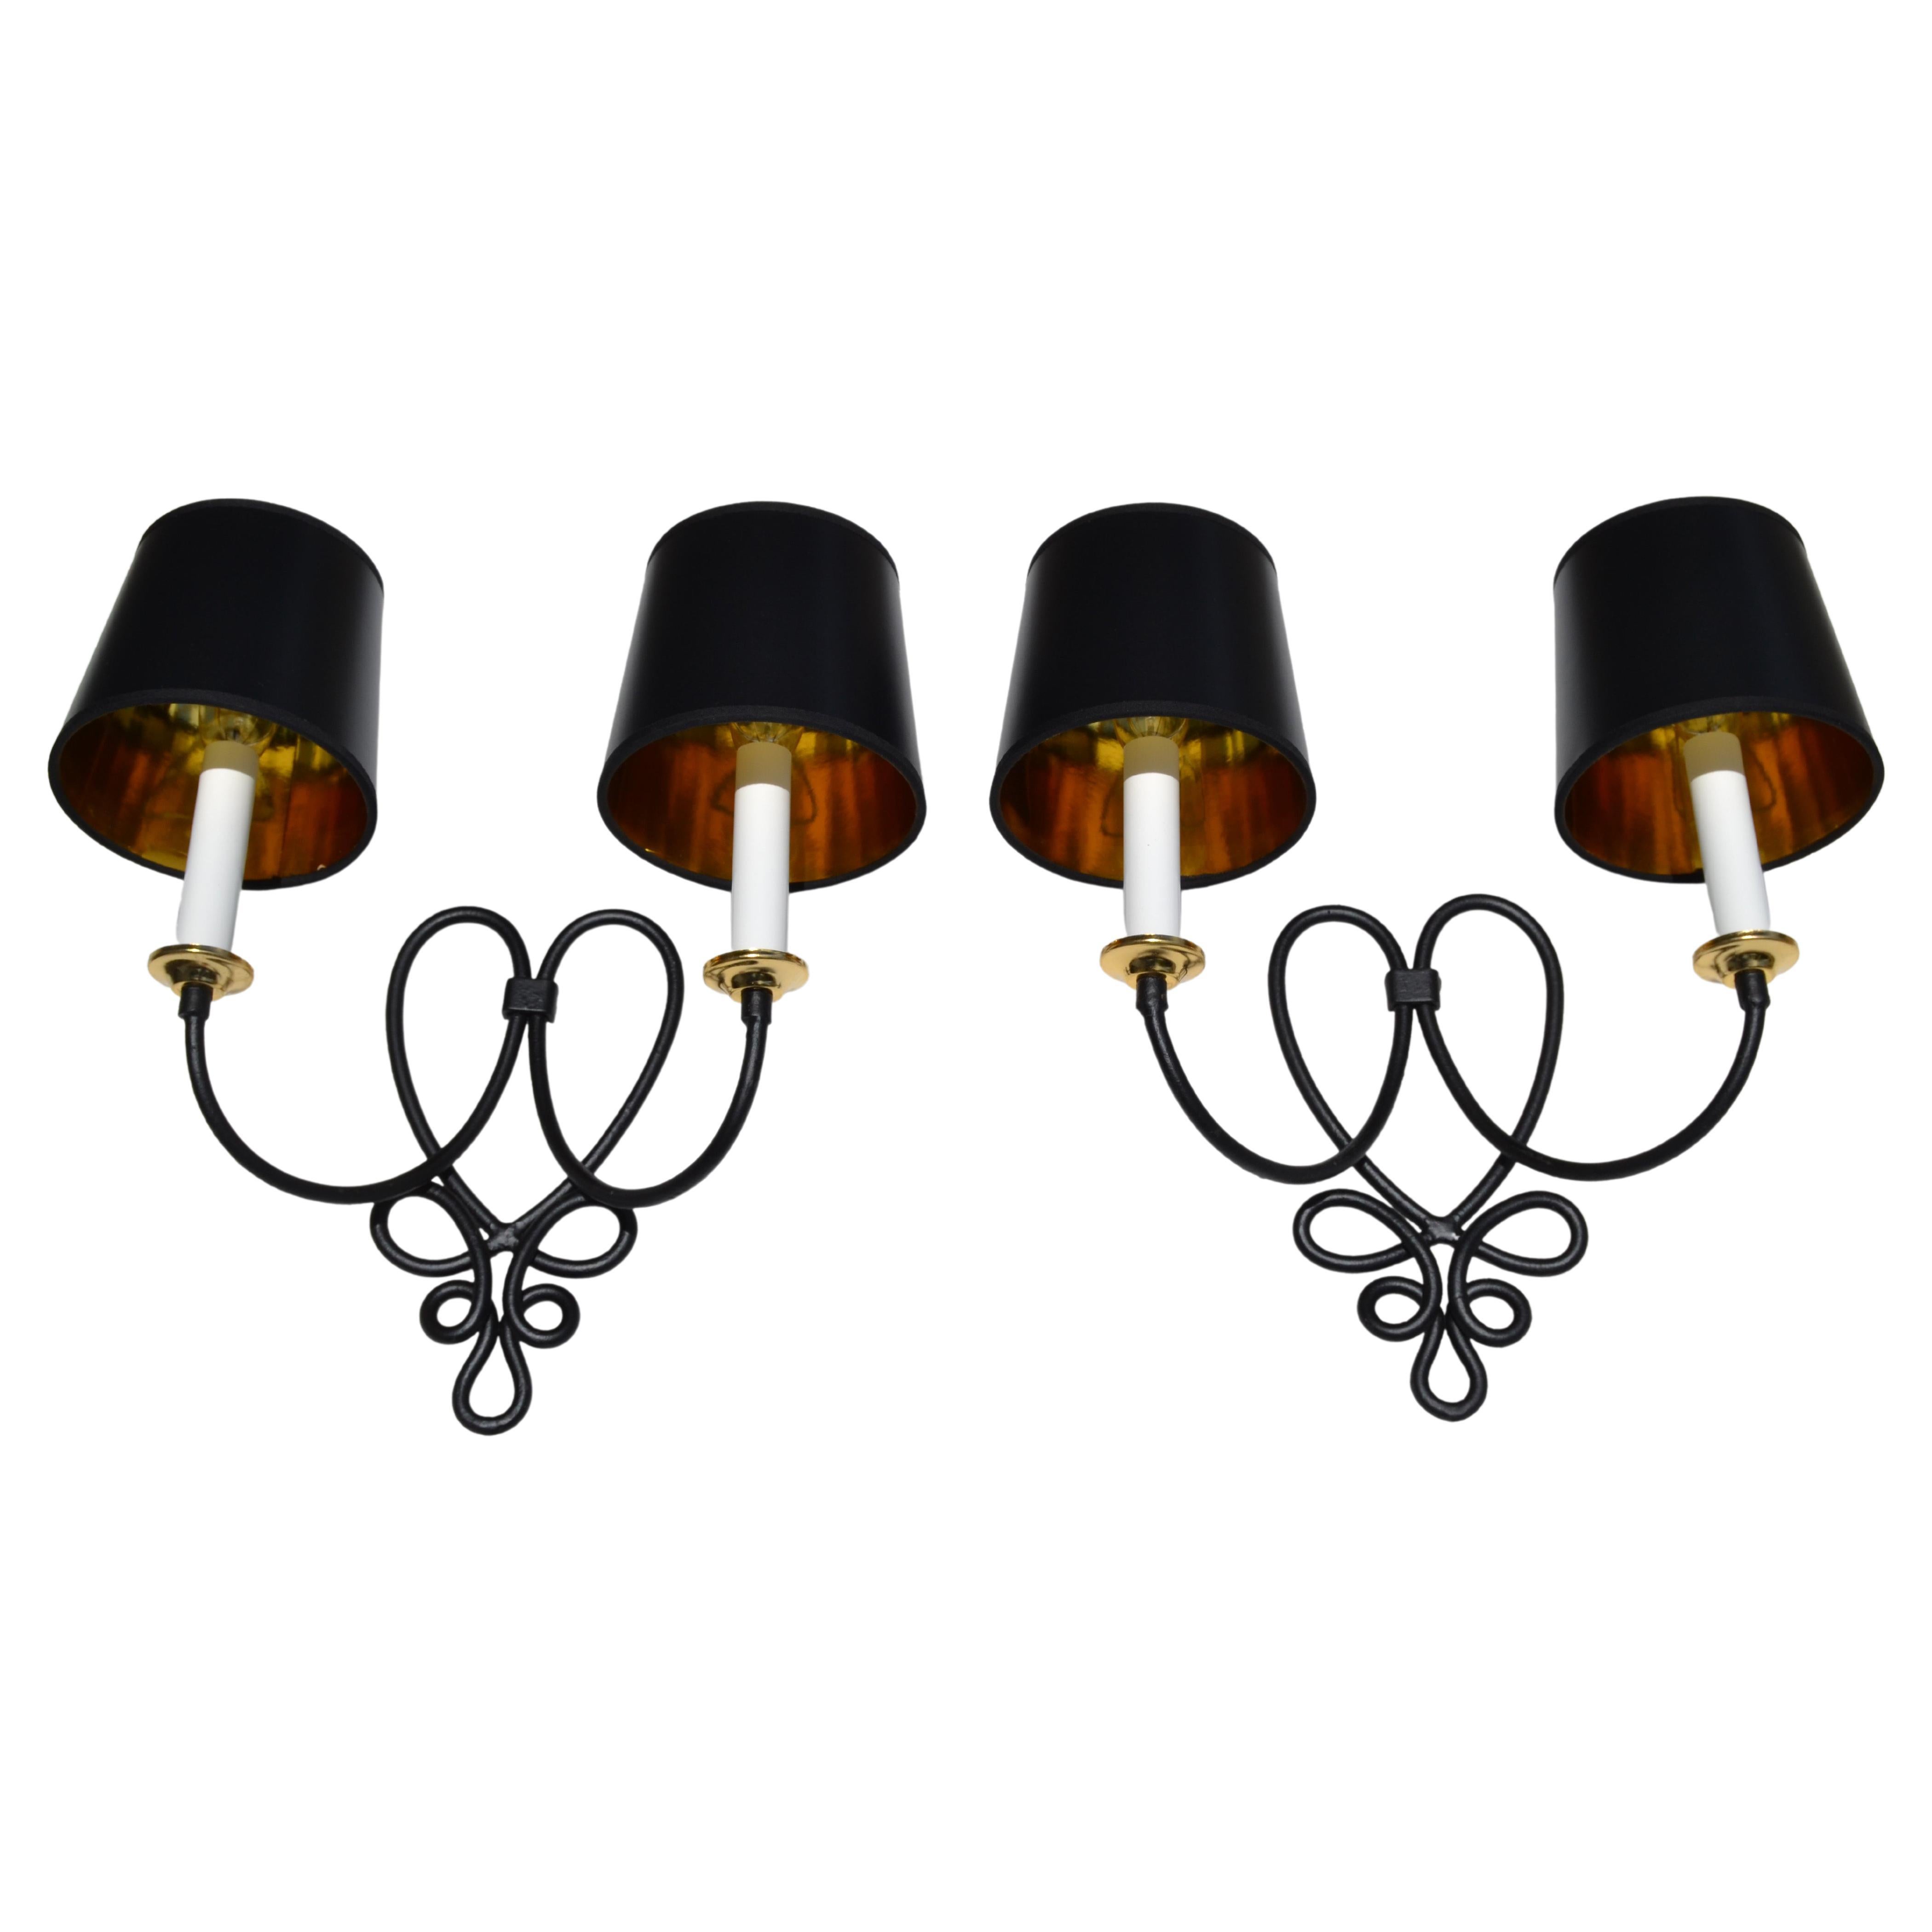 Art Deco pair of wrought iron 2 light sconces, wall lamps in black satin finish.
Made in France circa 1950.
US Rewiring and each Sconces takes 2 candelabra Light Bulbs with max. 40 watts.
Projection of the wall: 7 inches.
Width without the